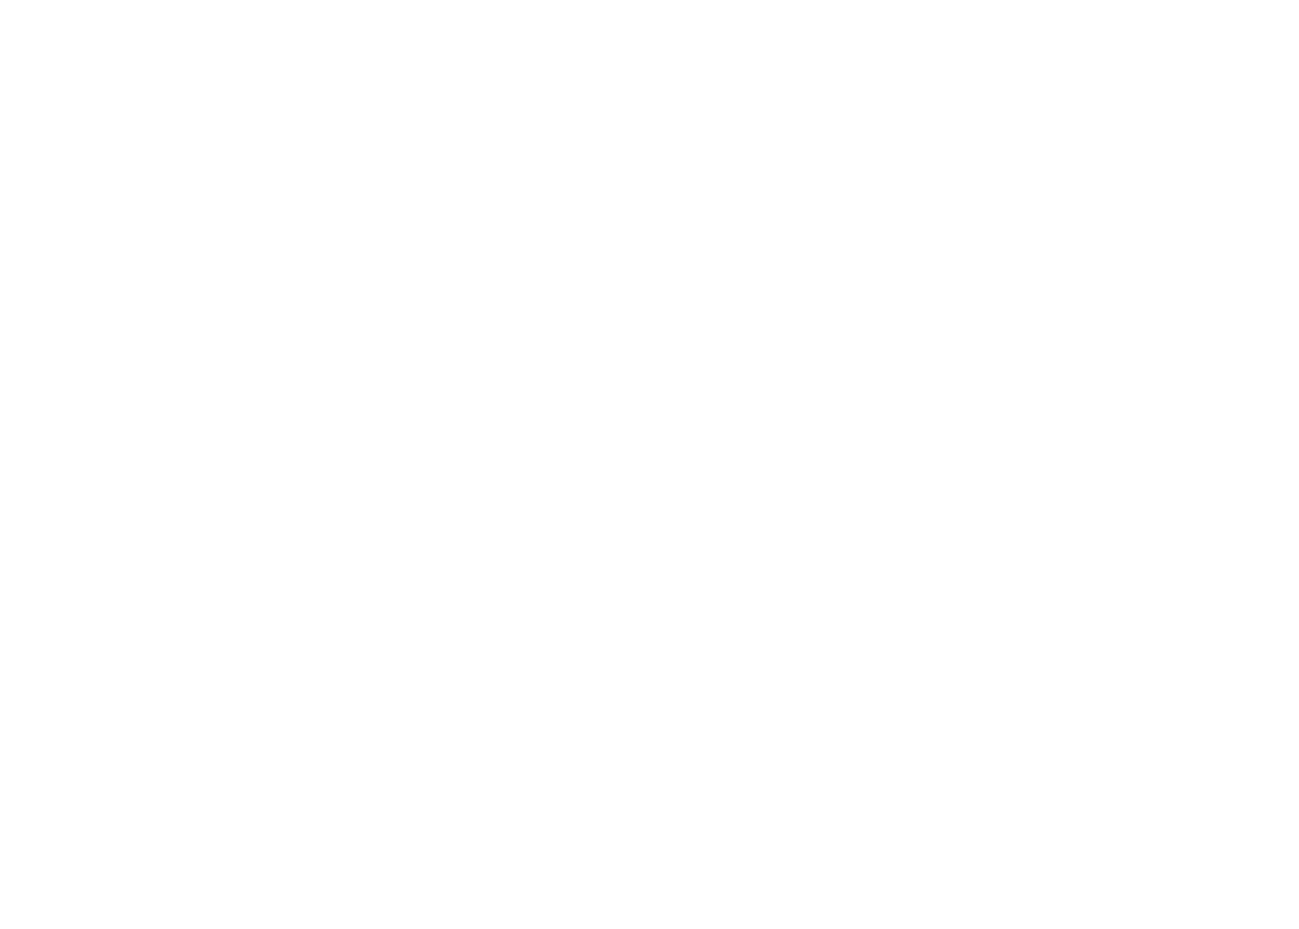 All stages participate in cooking lessons, integrating curriculum activities from key learning areas like measurement...